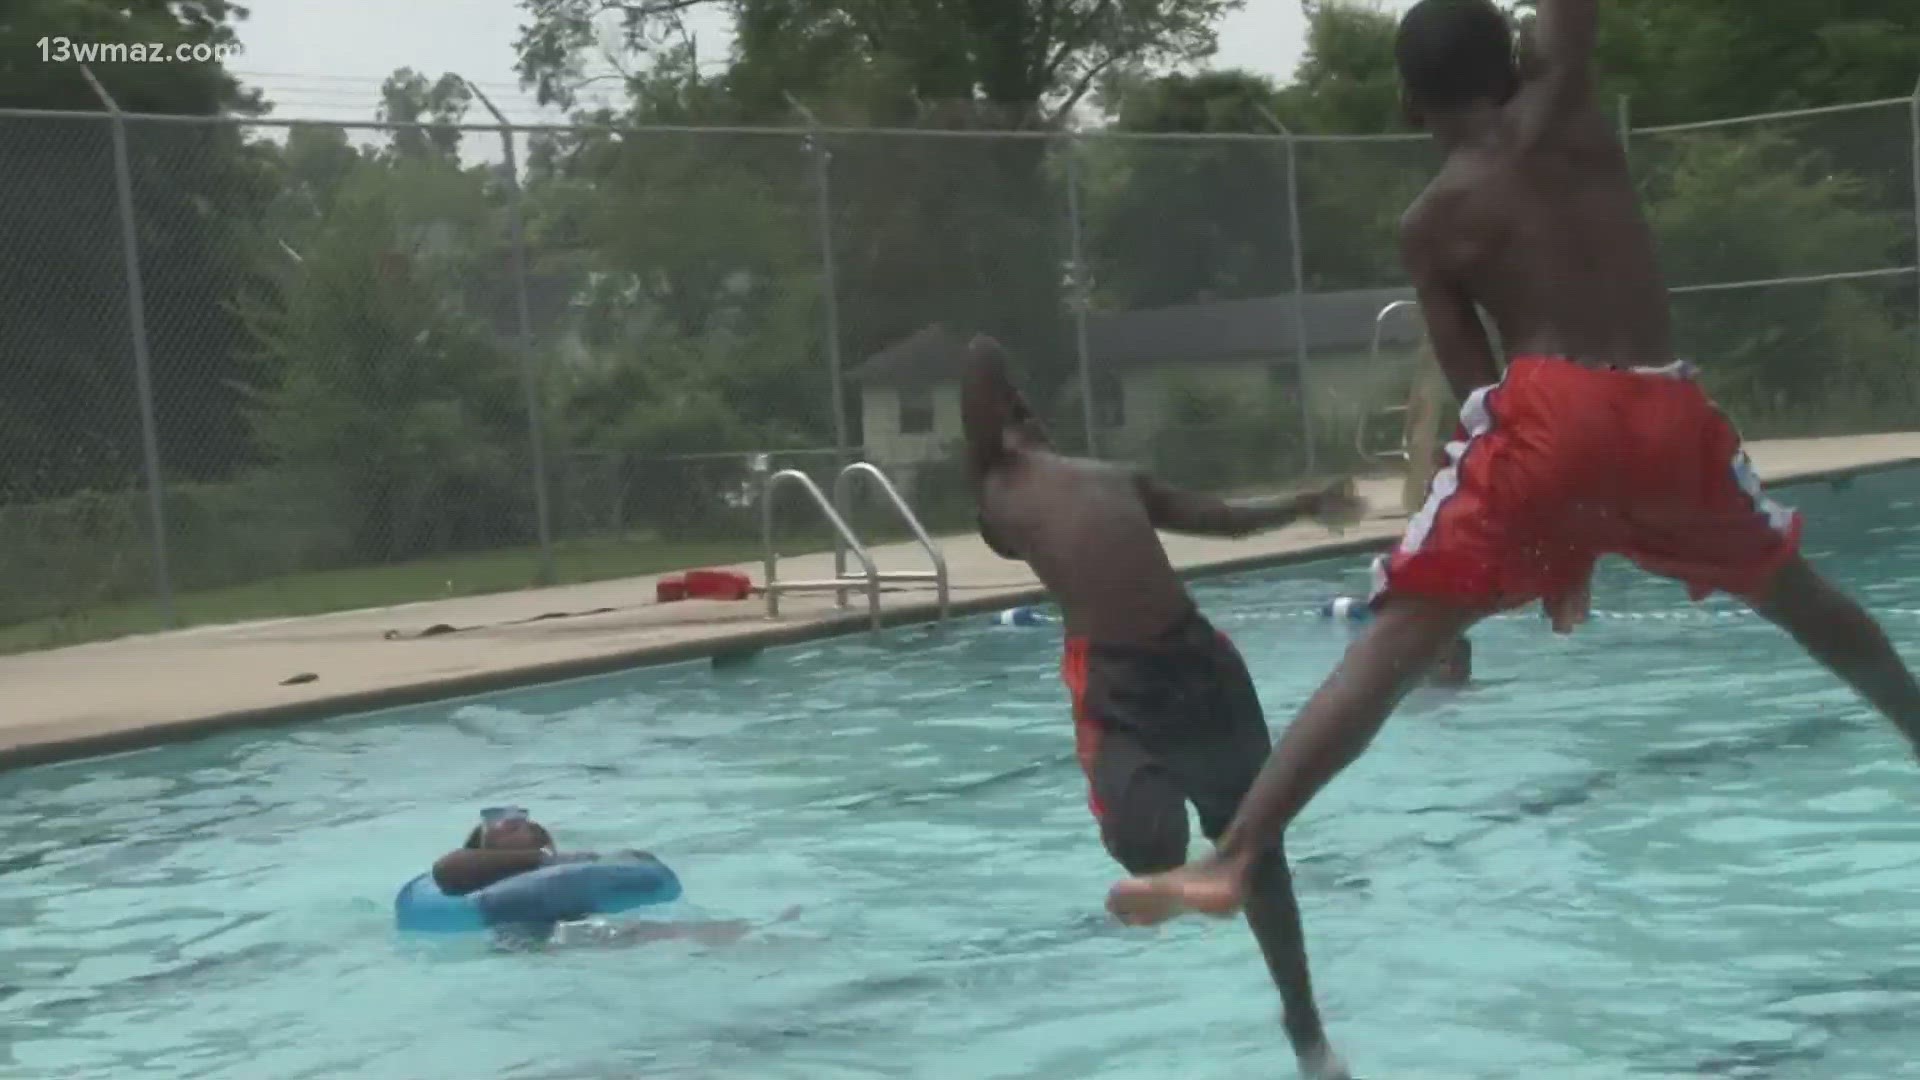 The shortage of lifeguards forced the county to rotate schedules for when certain pools were open. County officials say pools should be fully-staffed this summer.